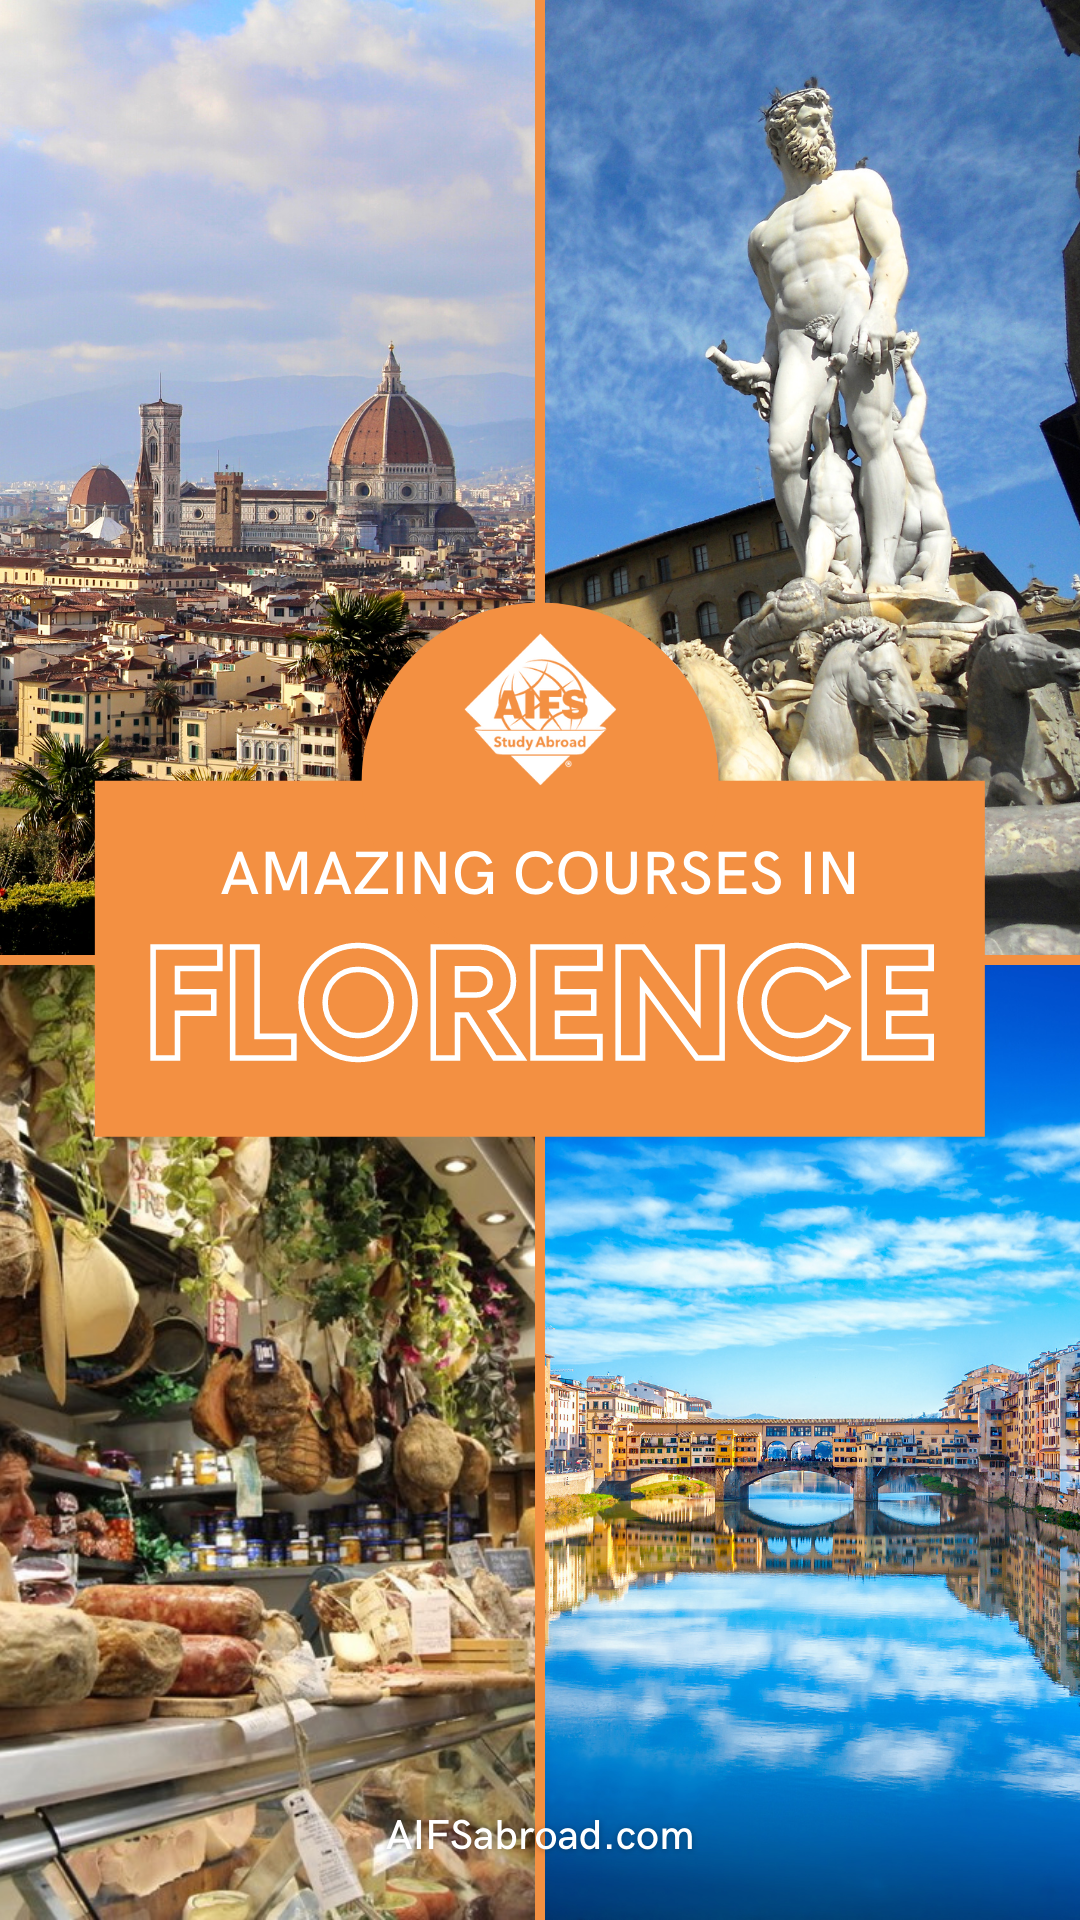 Amazing courses in Florence, Italy with AIFS Study Abroad